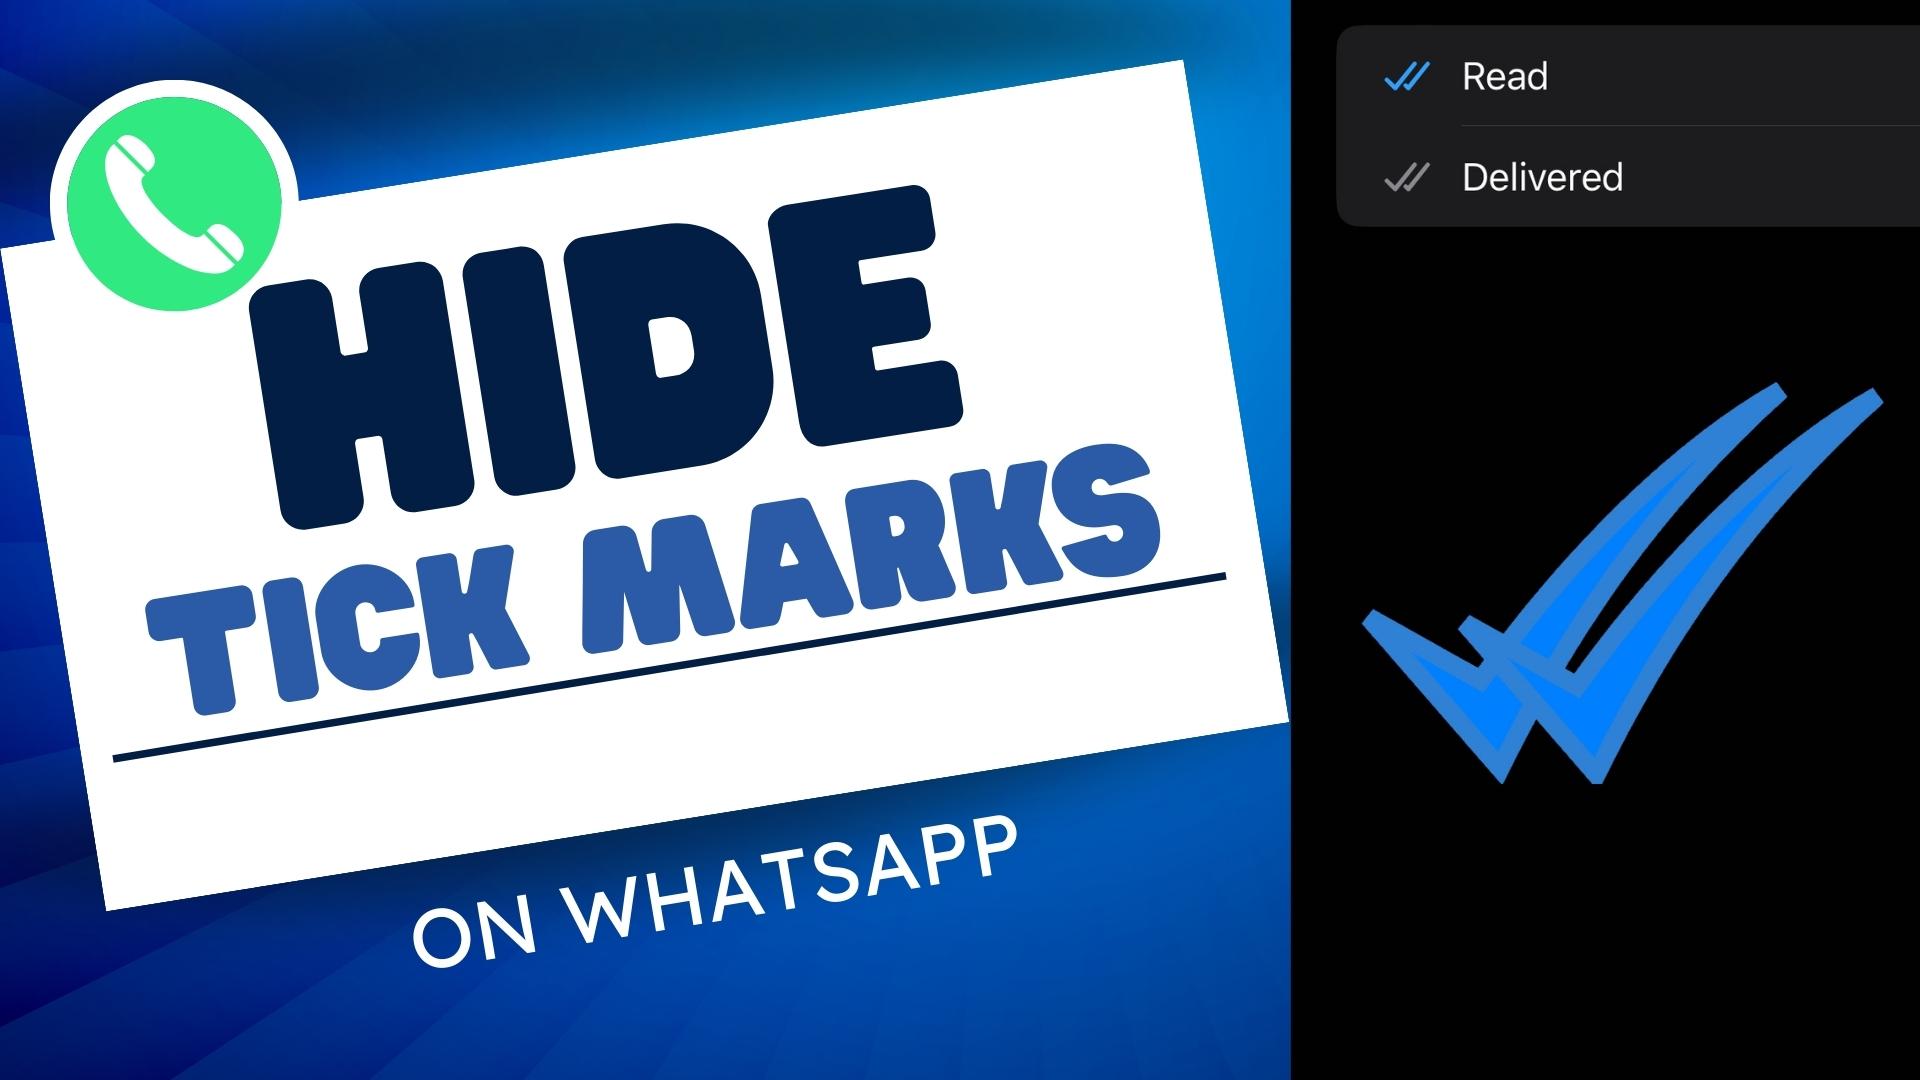  A blue and white graphic with the words 'Hide Tick Marks on WhatsApp' over a blue background with a green phone icon and a blue checkmark icon.